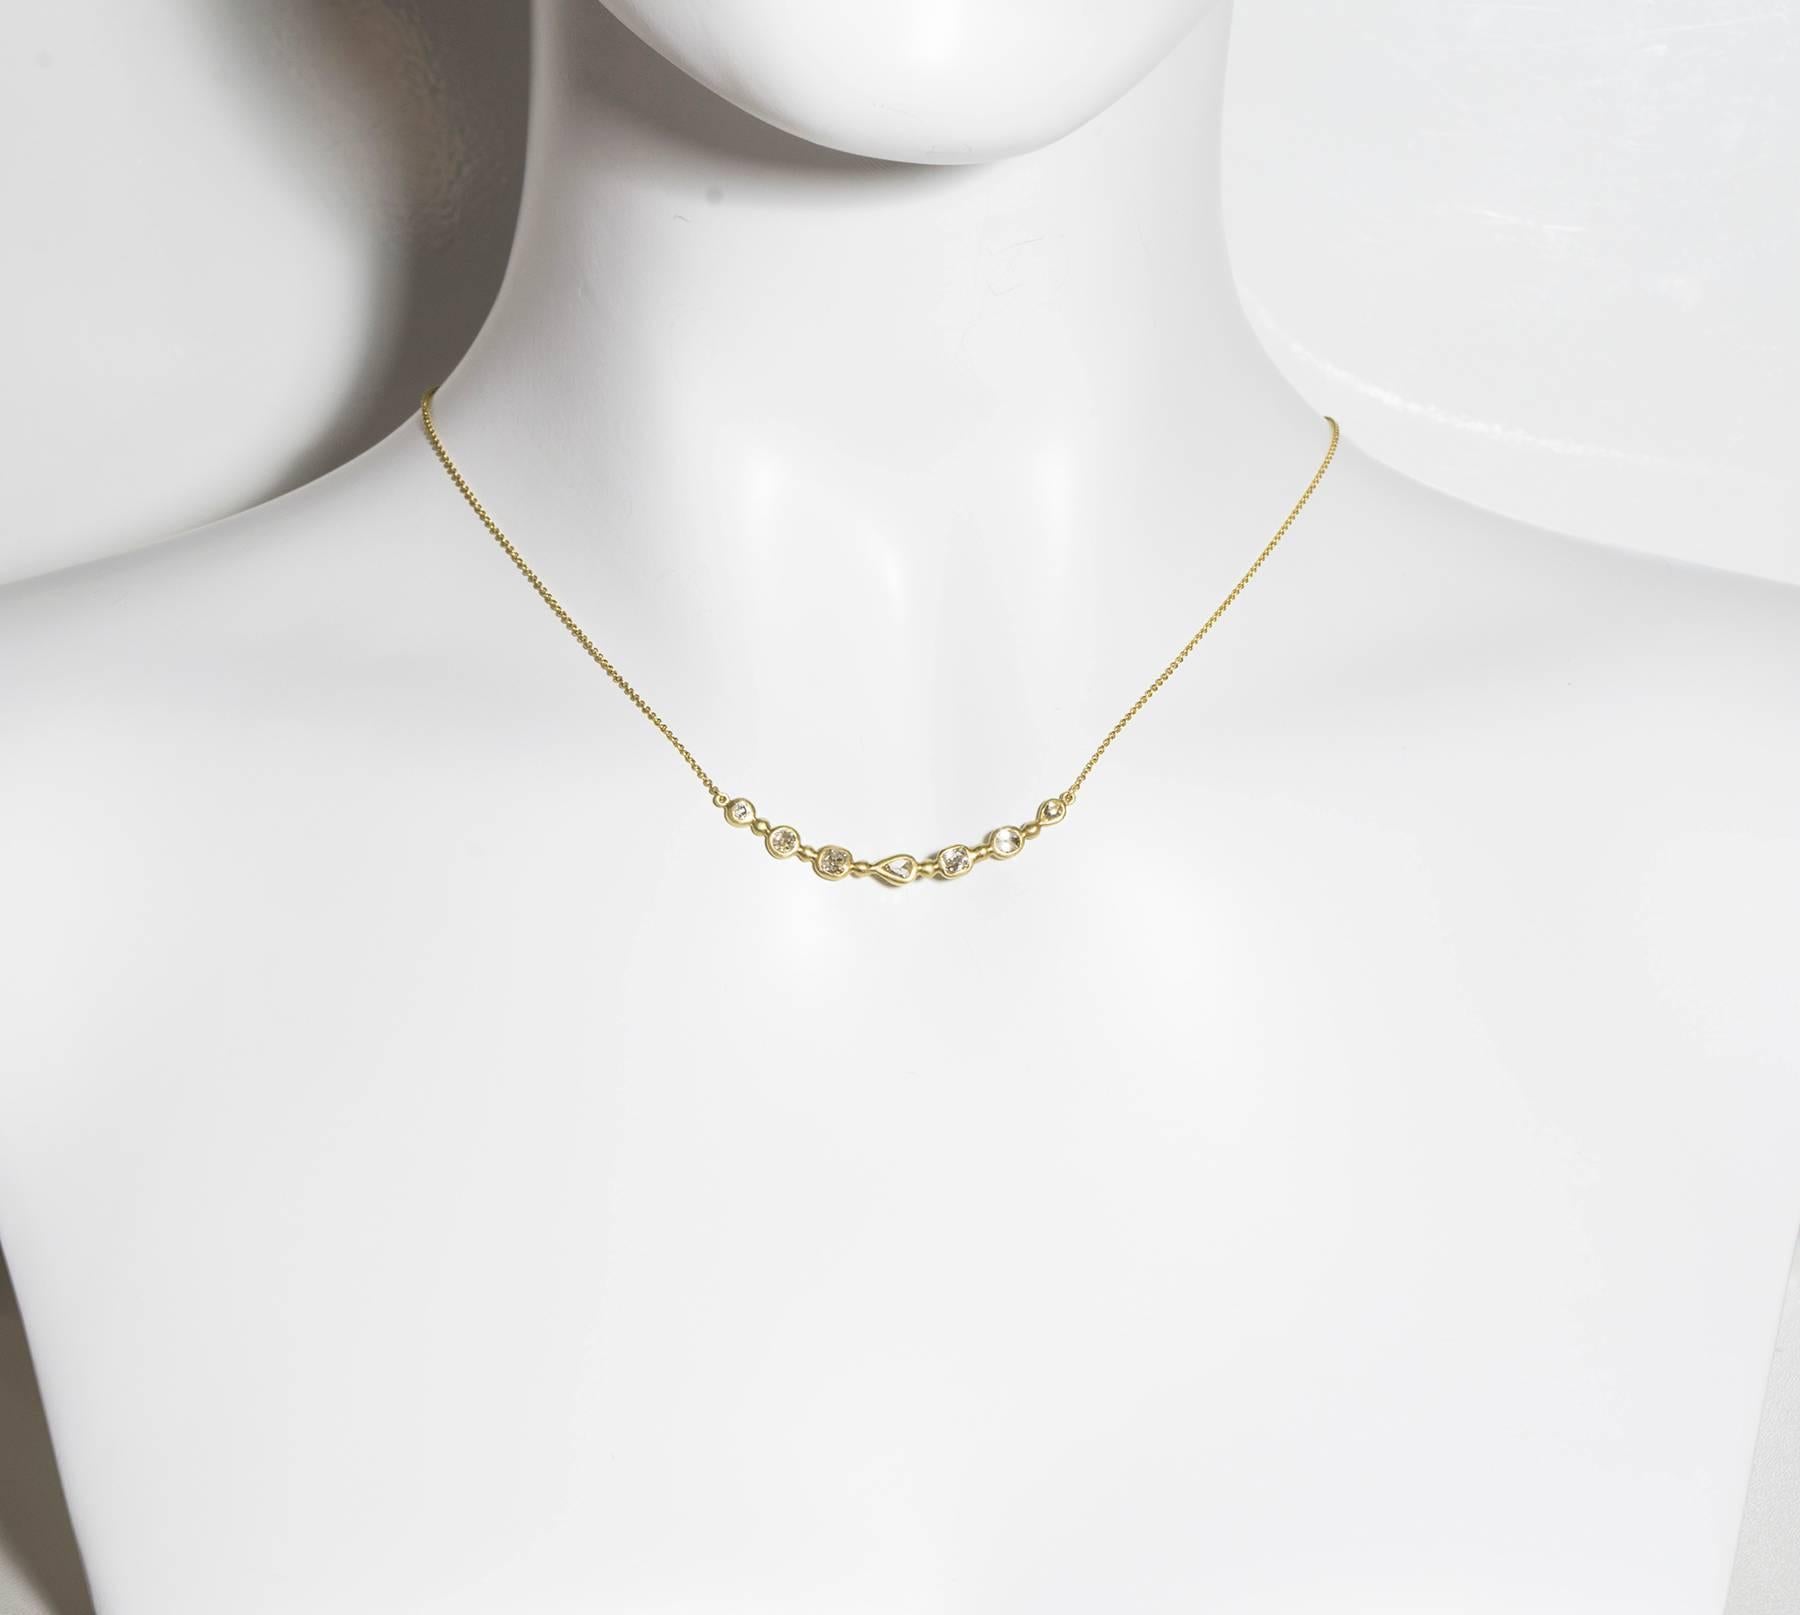 Handmade in 18k green* gold, each unique diamond shape is bezel set and combined together to form a delicate, sparkling arc of diamonds.  Wear alone for a sleek and contemporary look or perfect as a layering piece to create a chunkier look. 